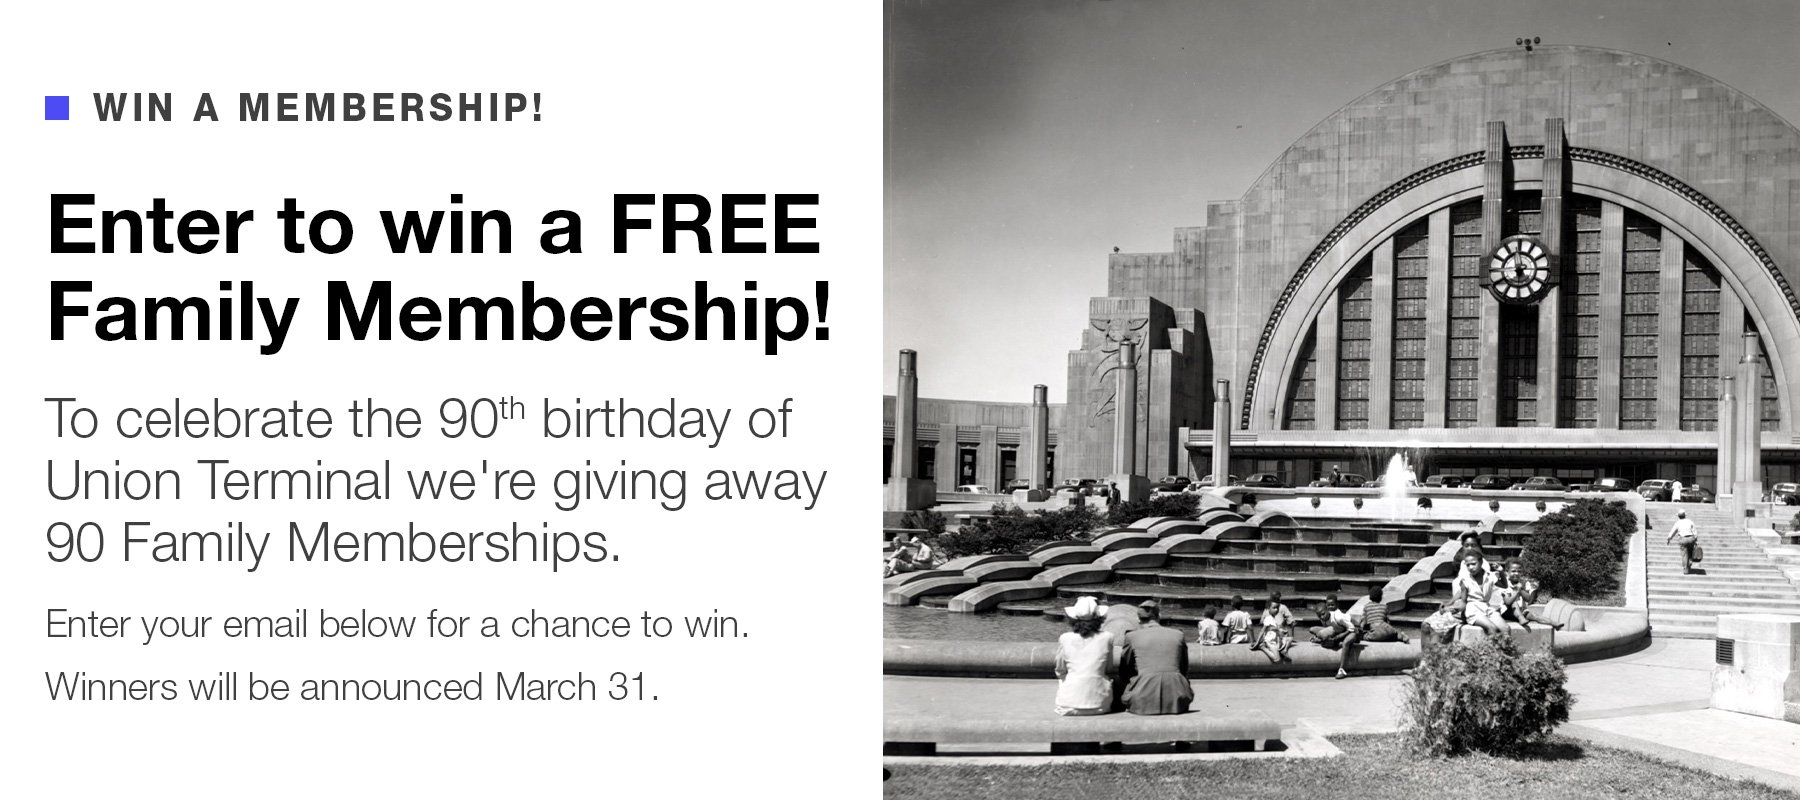 Enter to win a free Family Membership! To celebrate the 90th birthday of Union Terminal we're giving away 90 Family Memberships. Enter your email below for a chance to win. Winners will be announced March 31.